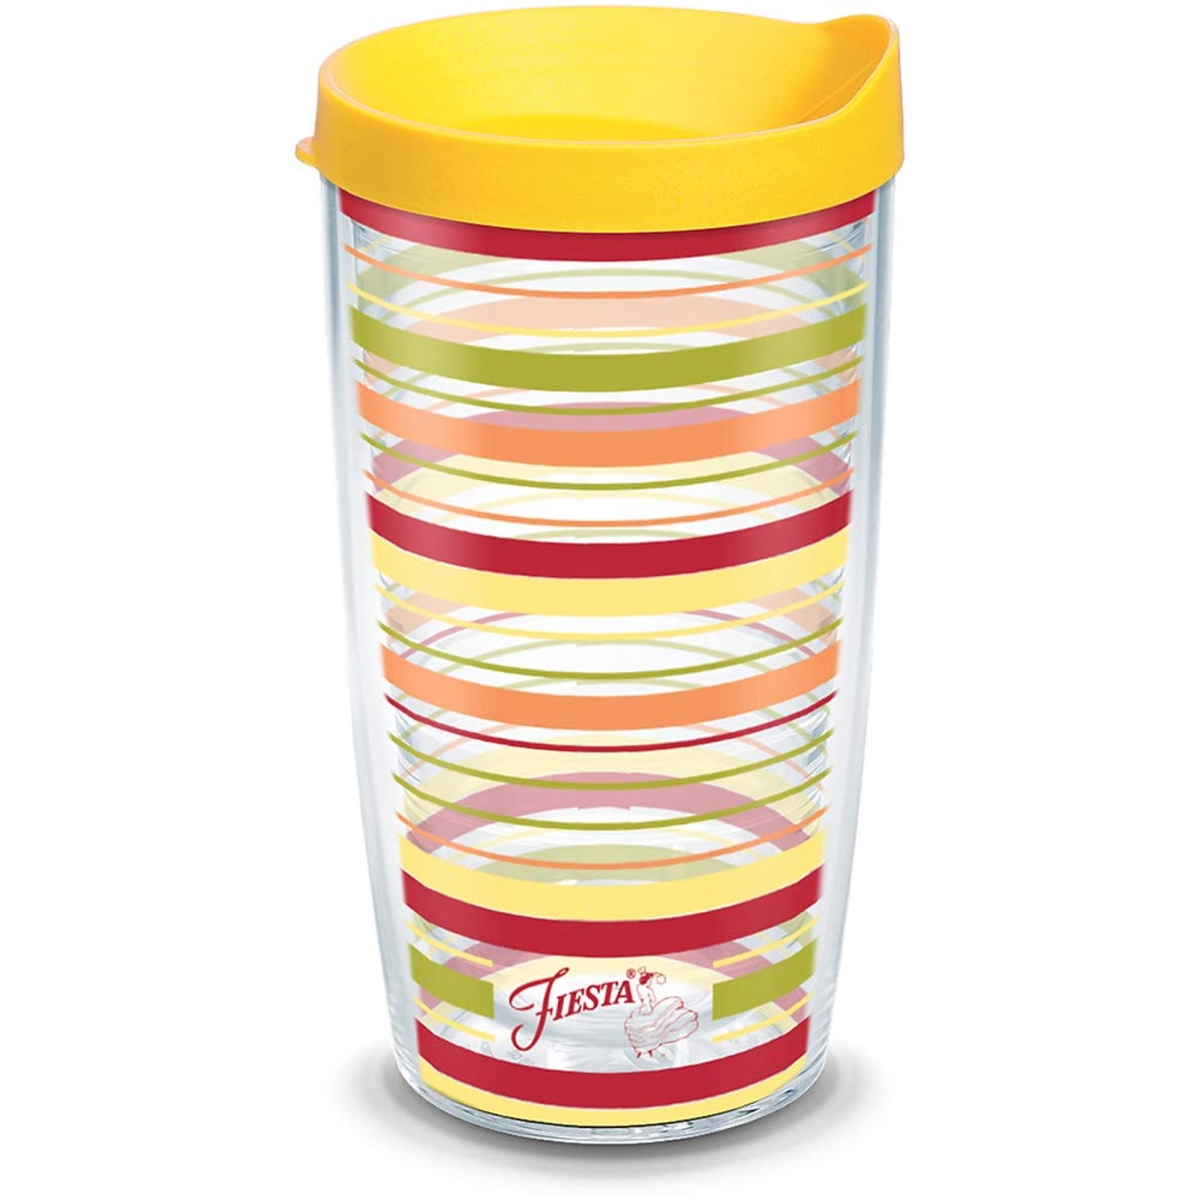 093597365089 Fiesta Sunny Stripes 16 Oz Tumbler With Lid